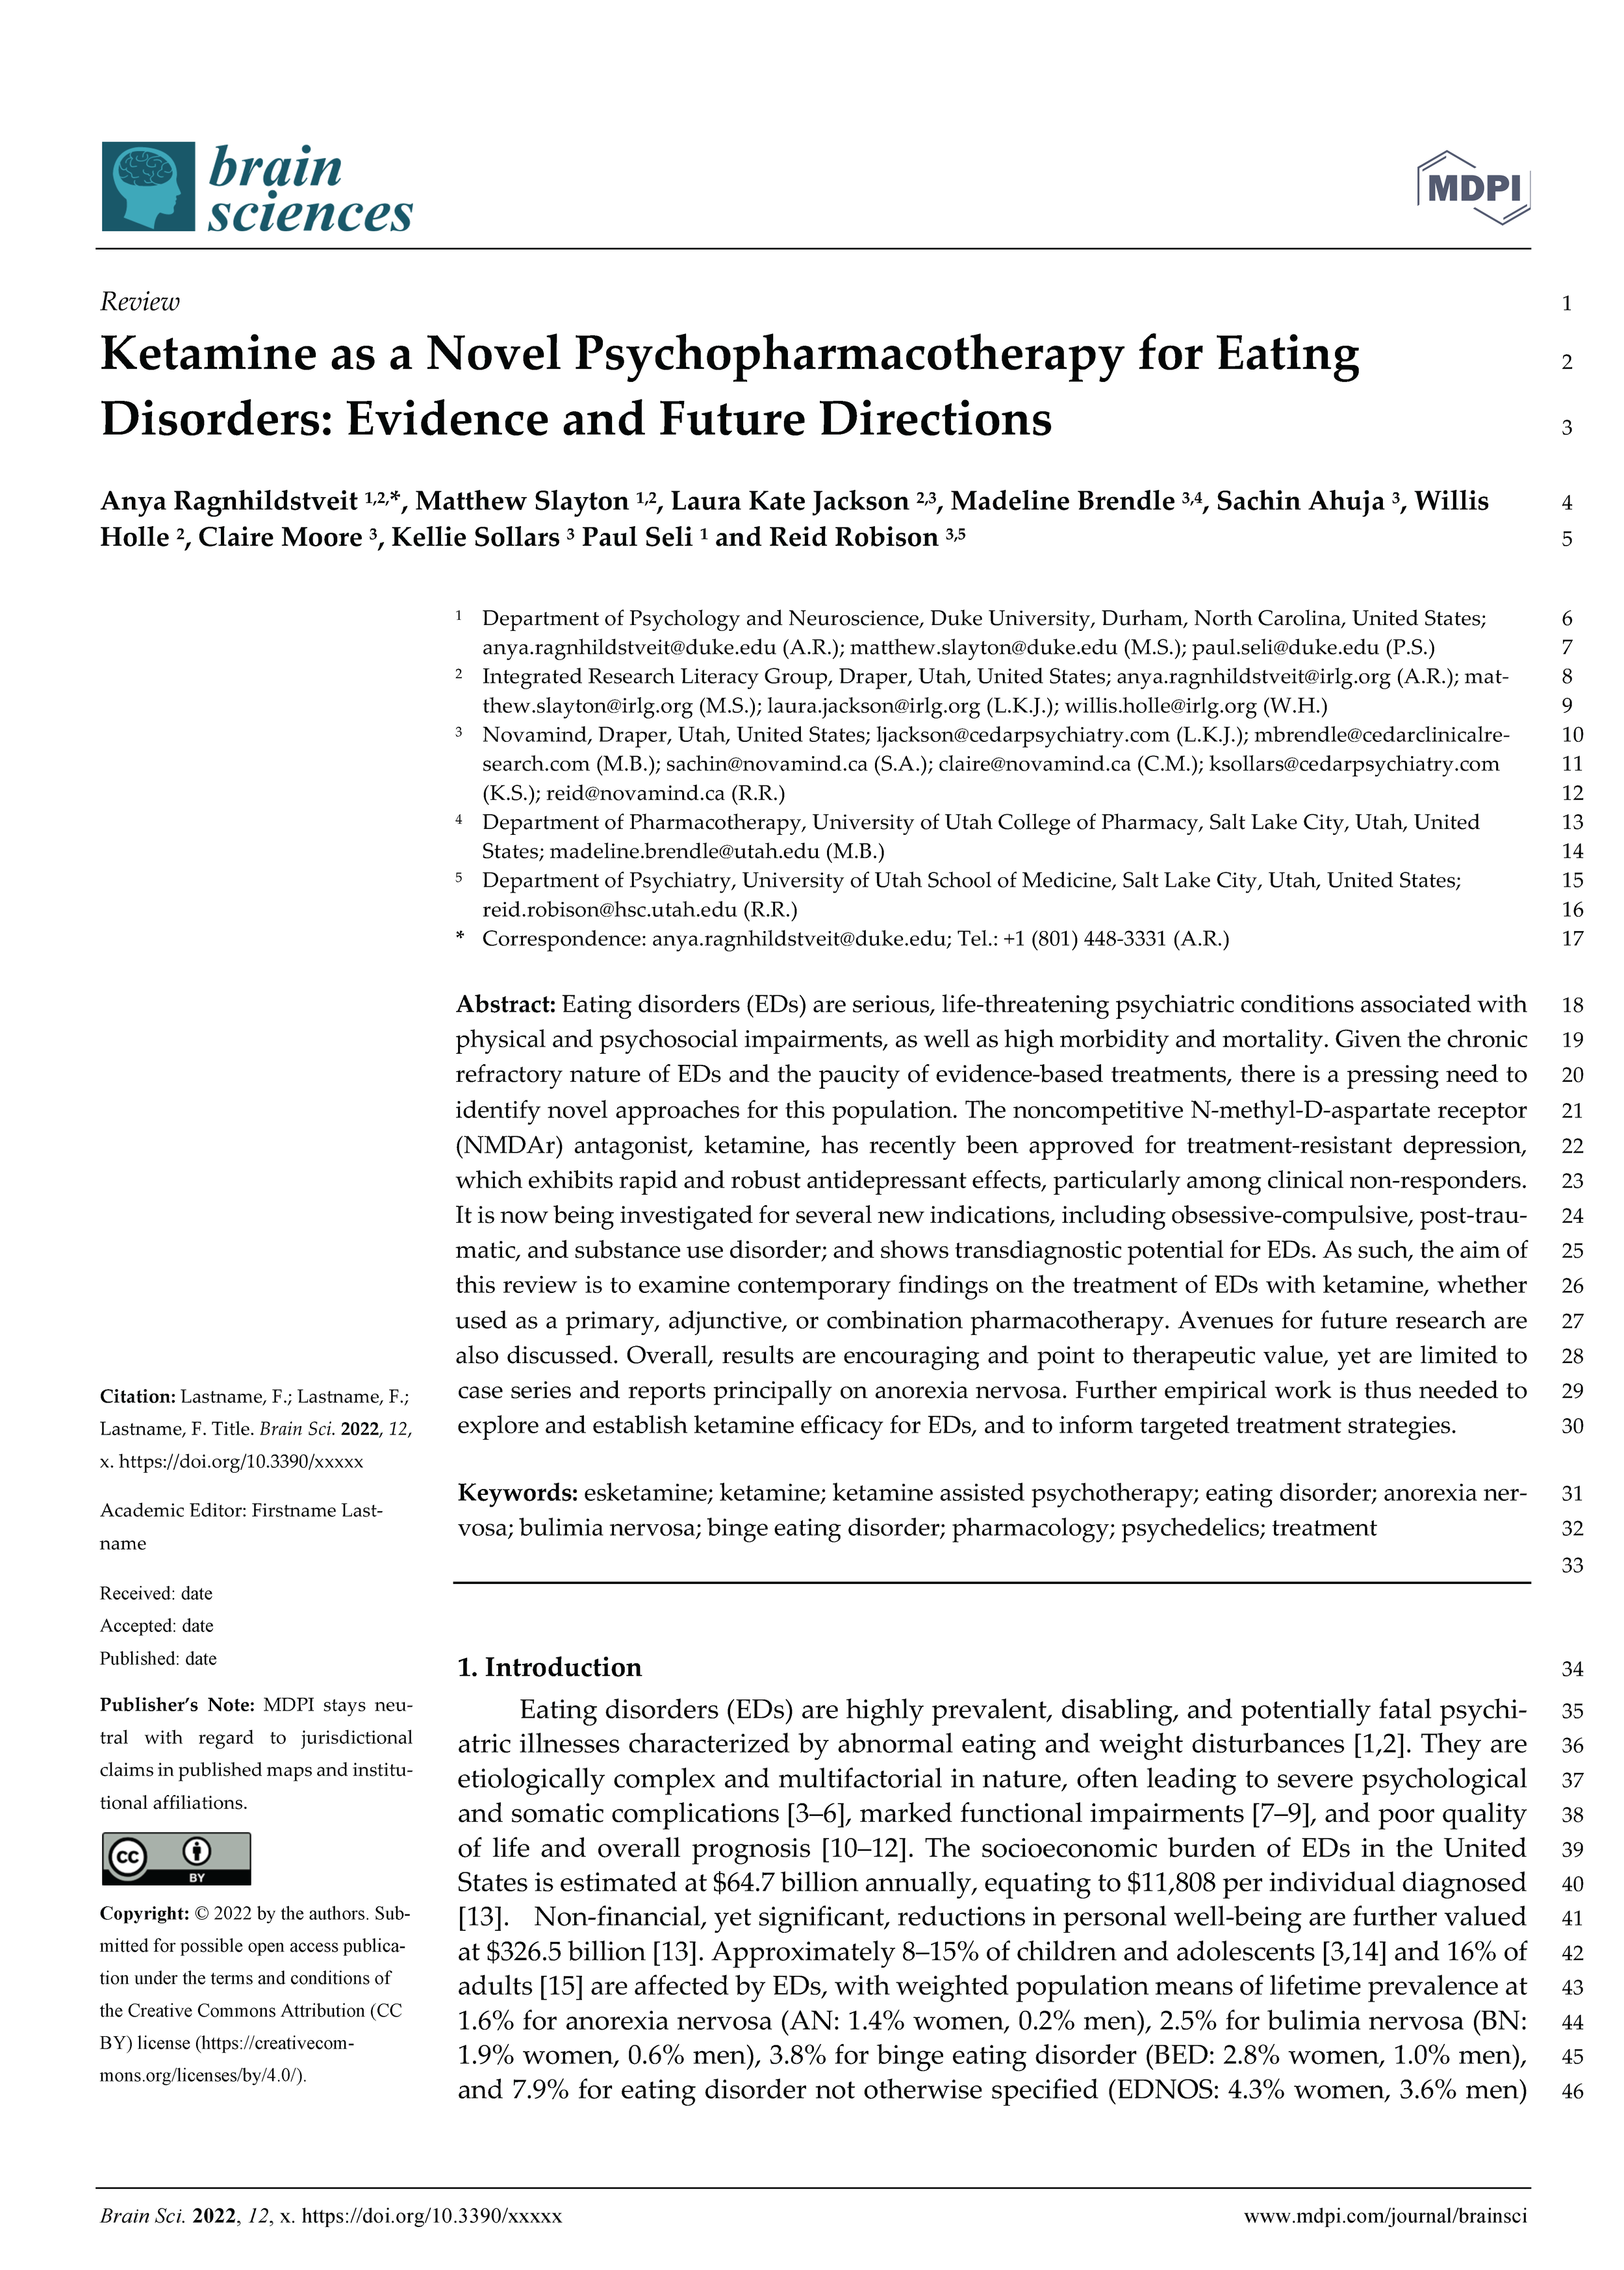 Ketamine as a Novel Psychopharmacotherapy for Eating Disorders - 2-9-2022_Page_01.png